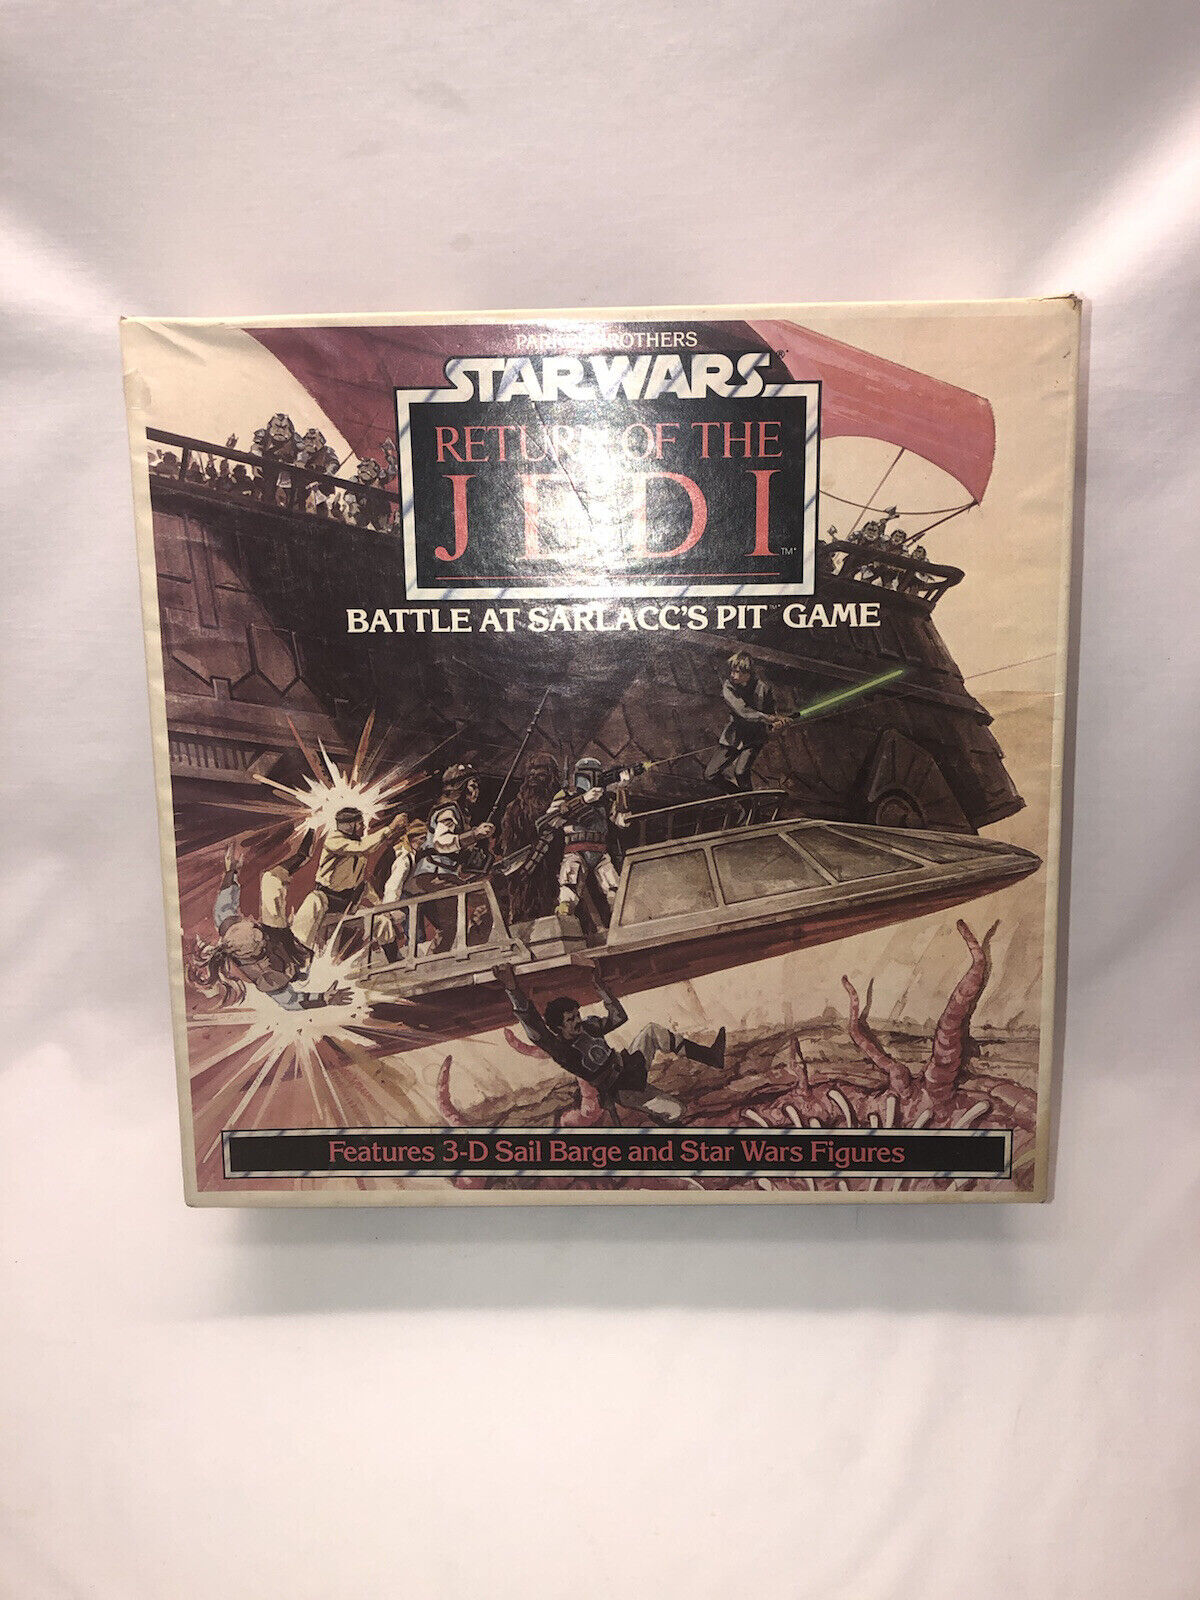 💥 STAR WARS - ROTJ, Battle at Sarlacc's Pit Board Game, Parker Bros COMPLETE 💥